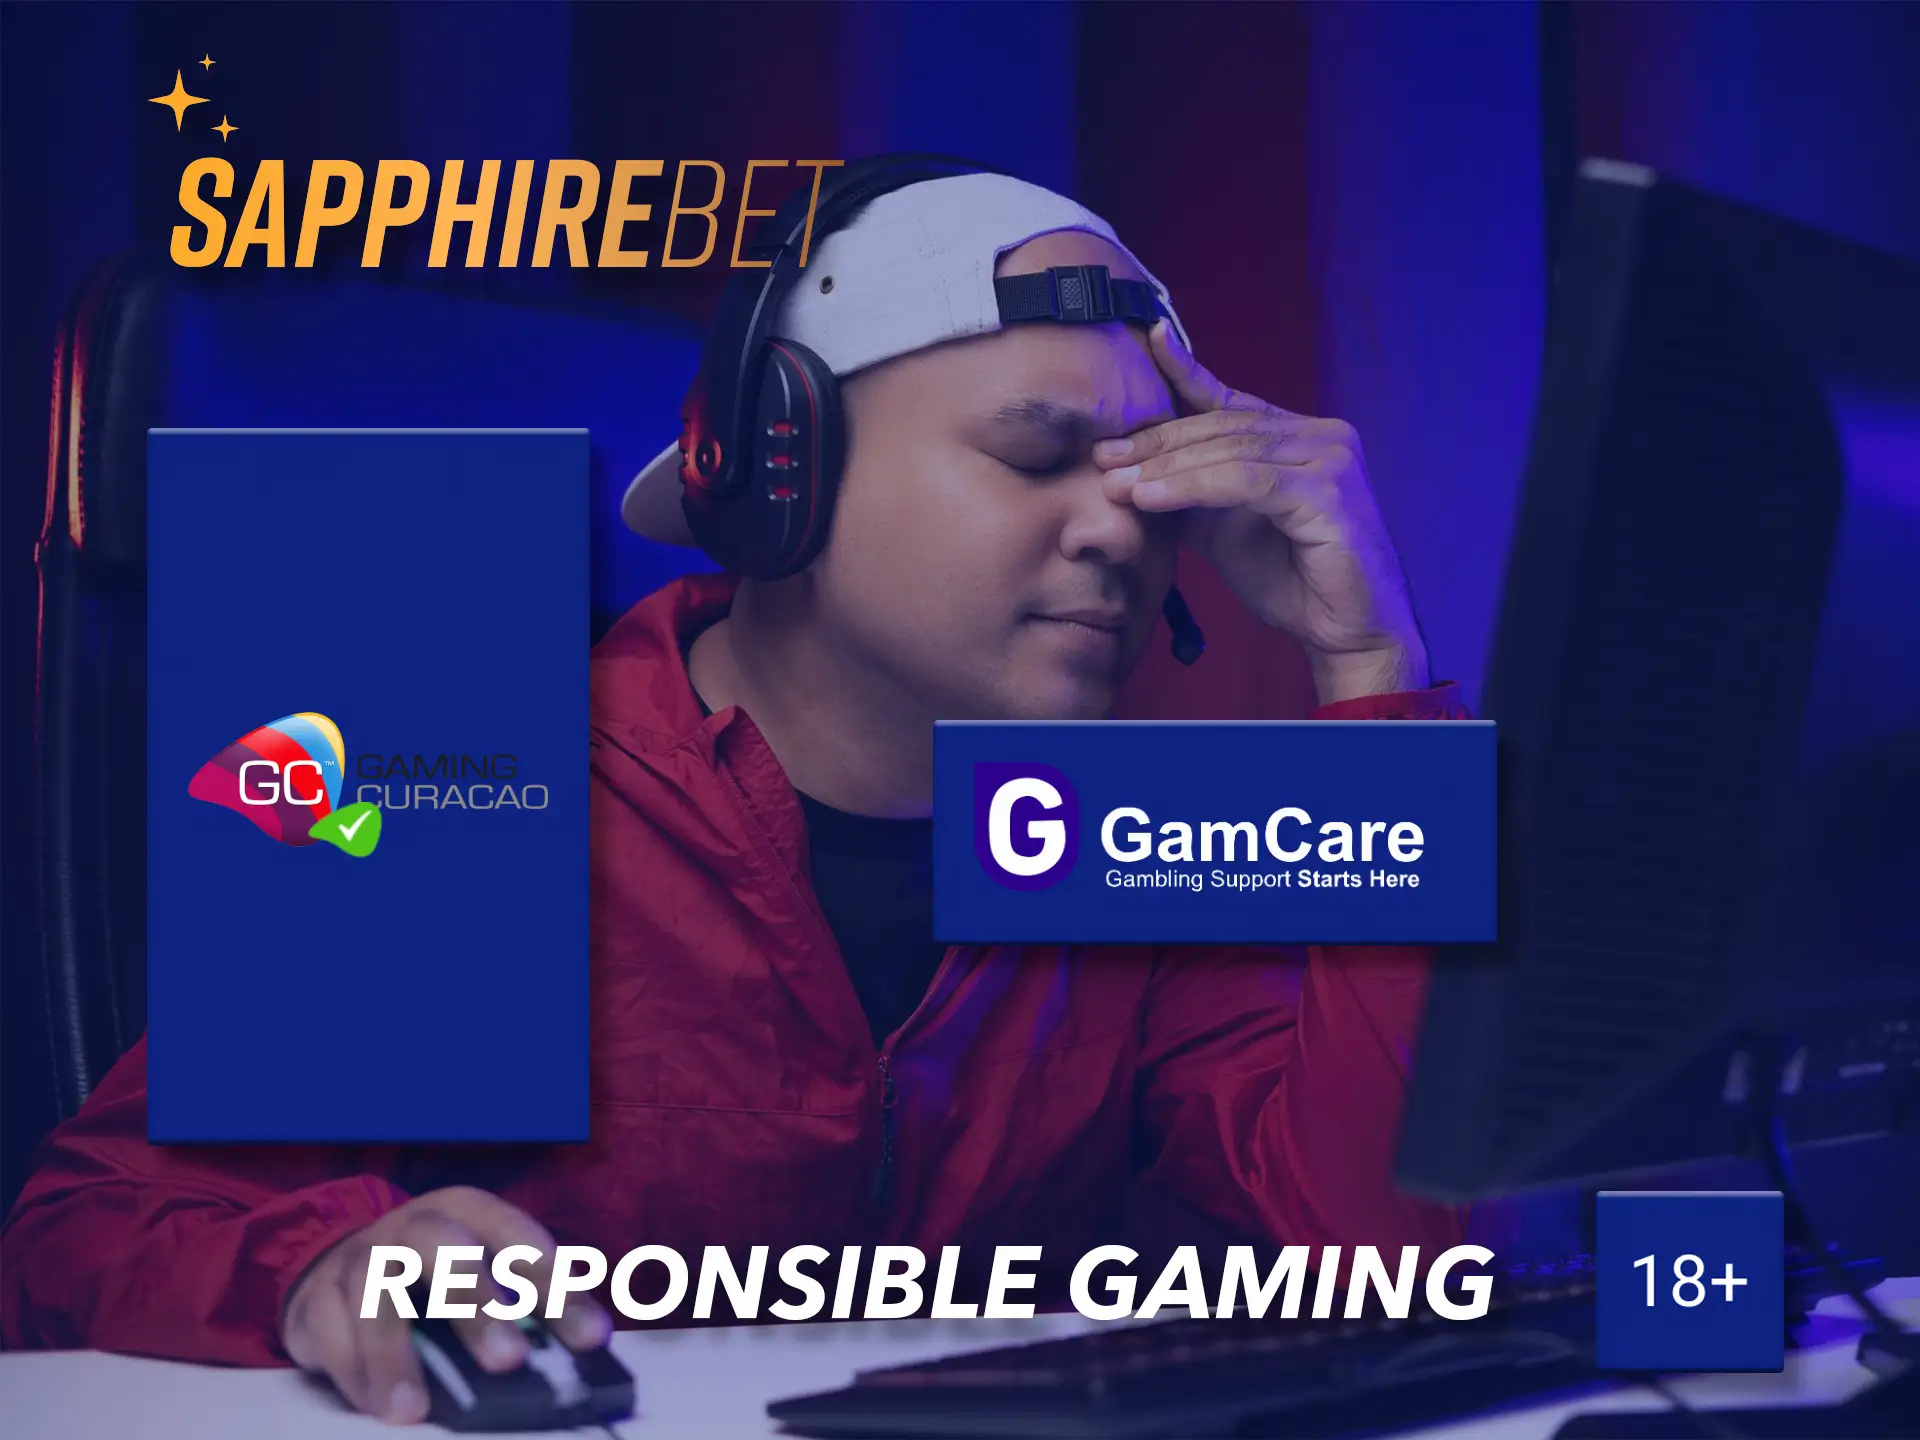 Approach betting responsibly and take a break when playing at Sapphirebet Casino.